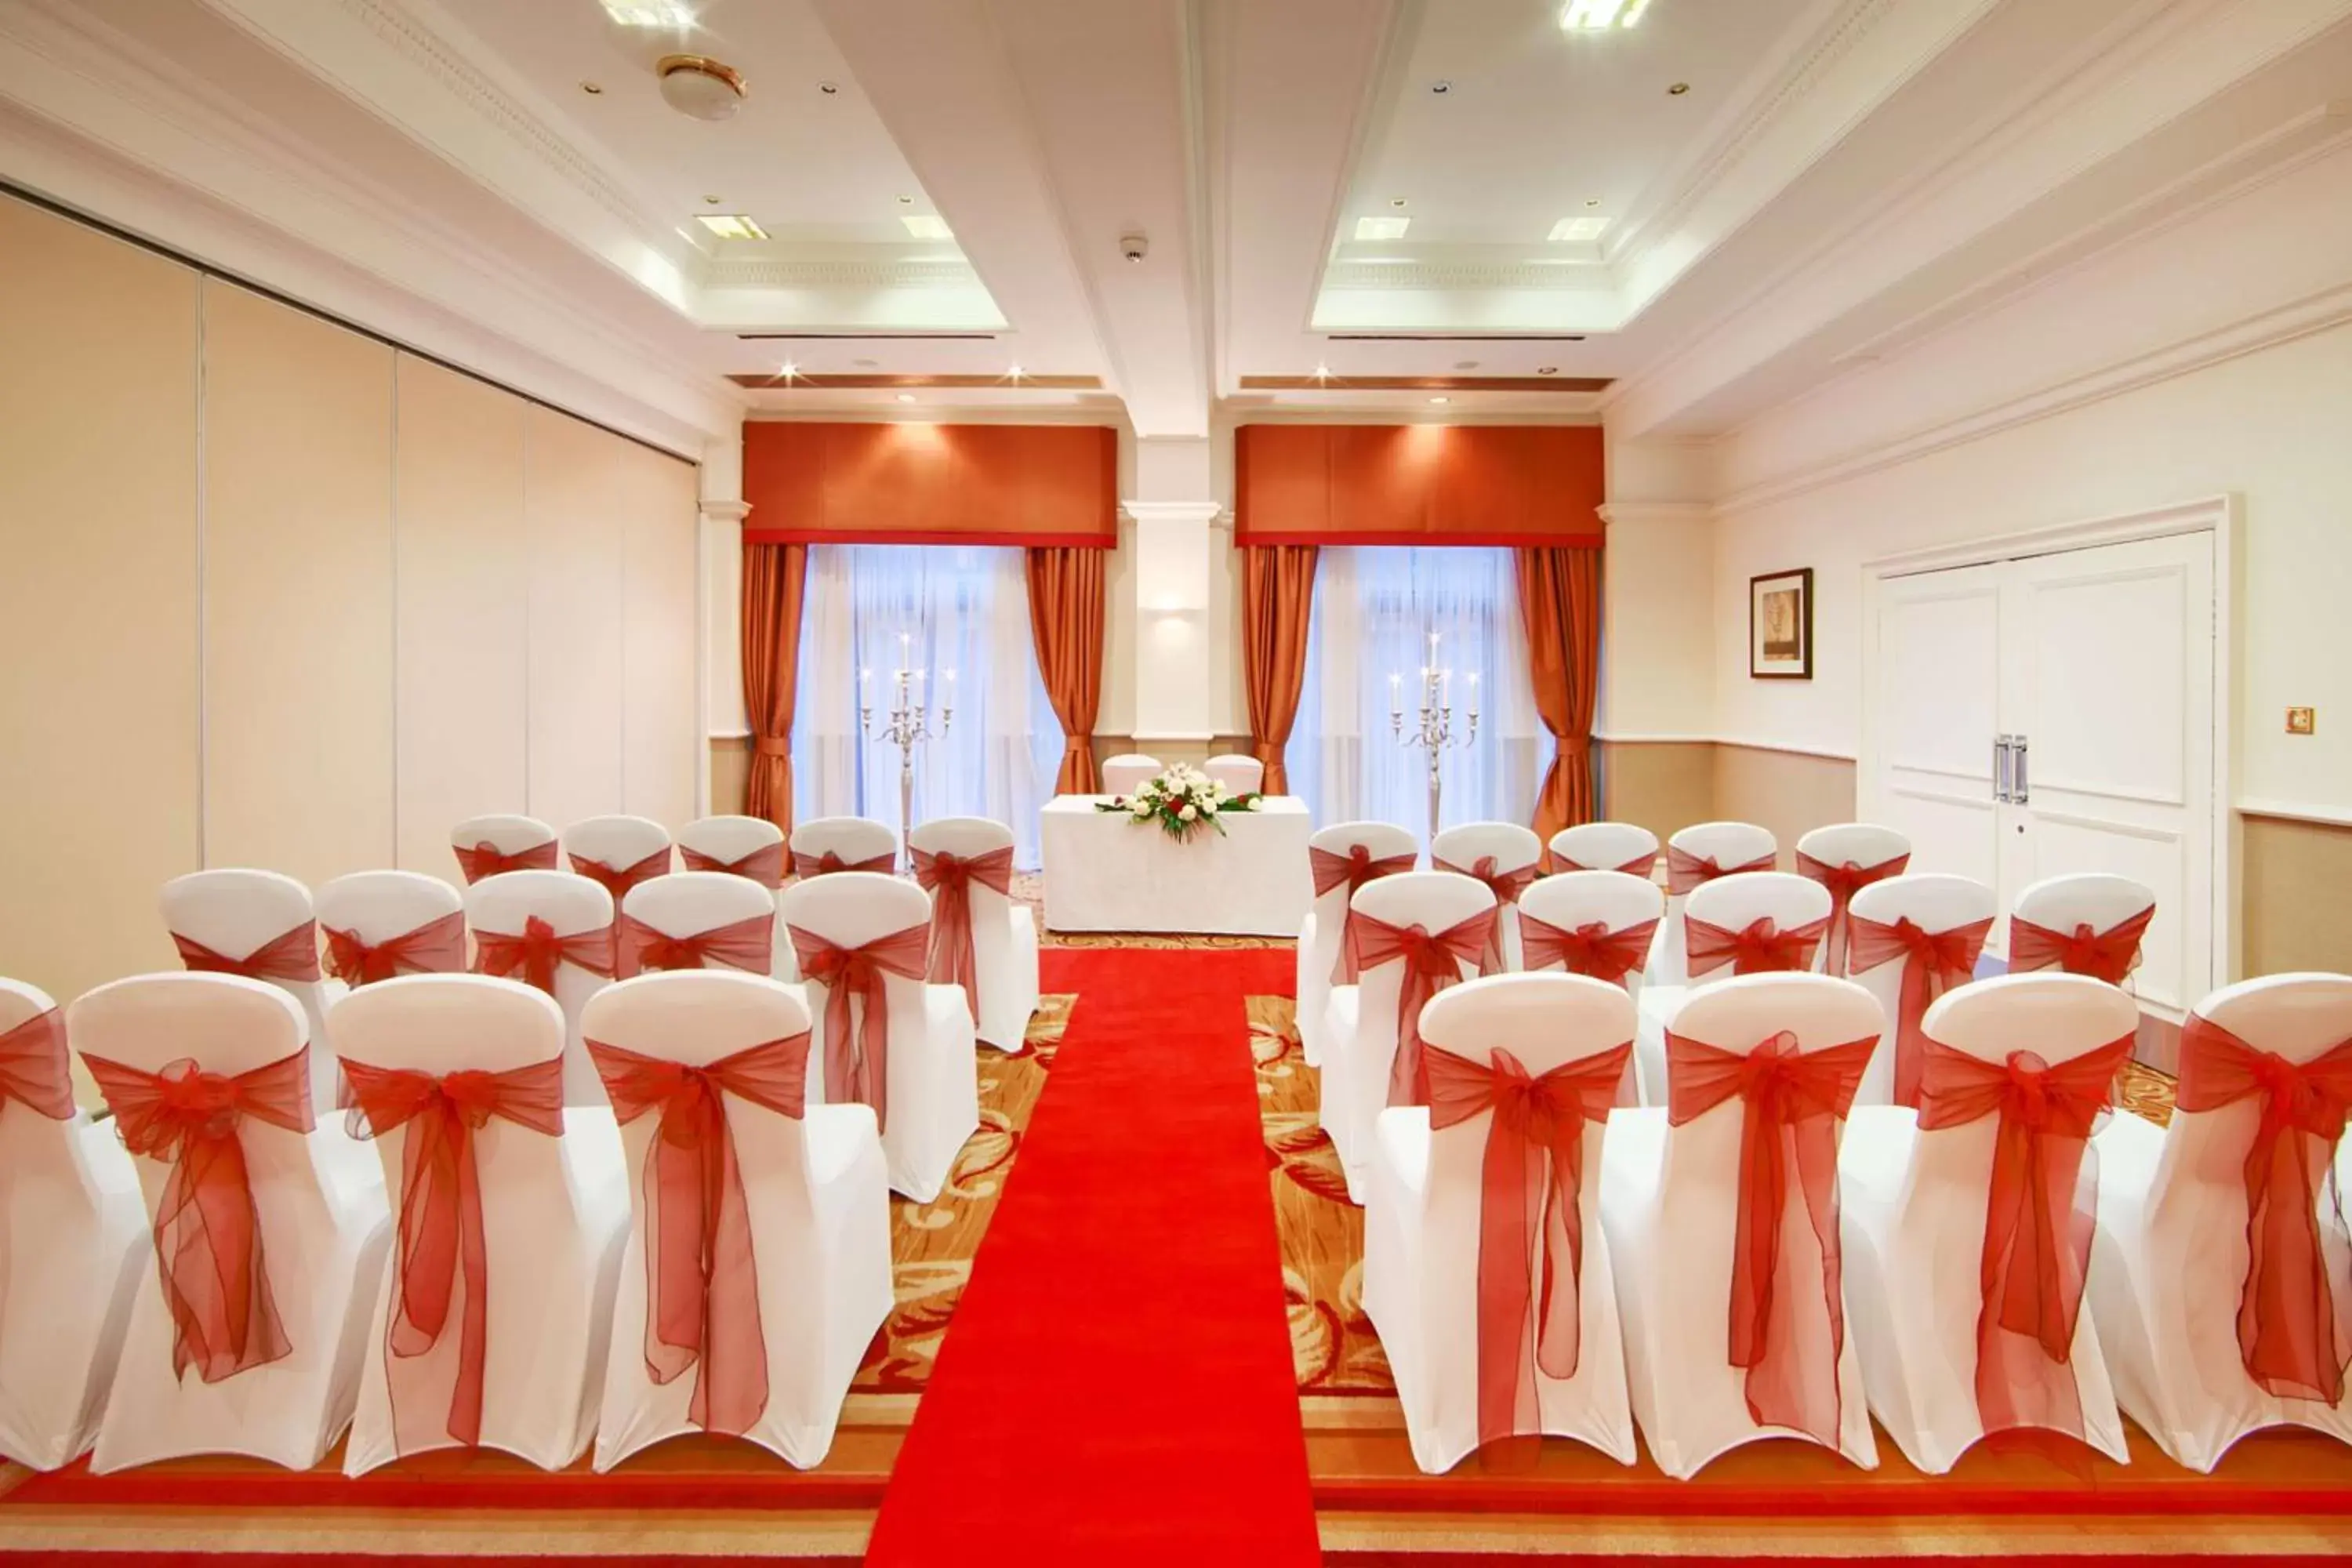 Meeting/conference room, Banquet Facilities in Hilton York